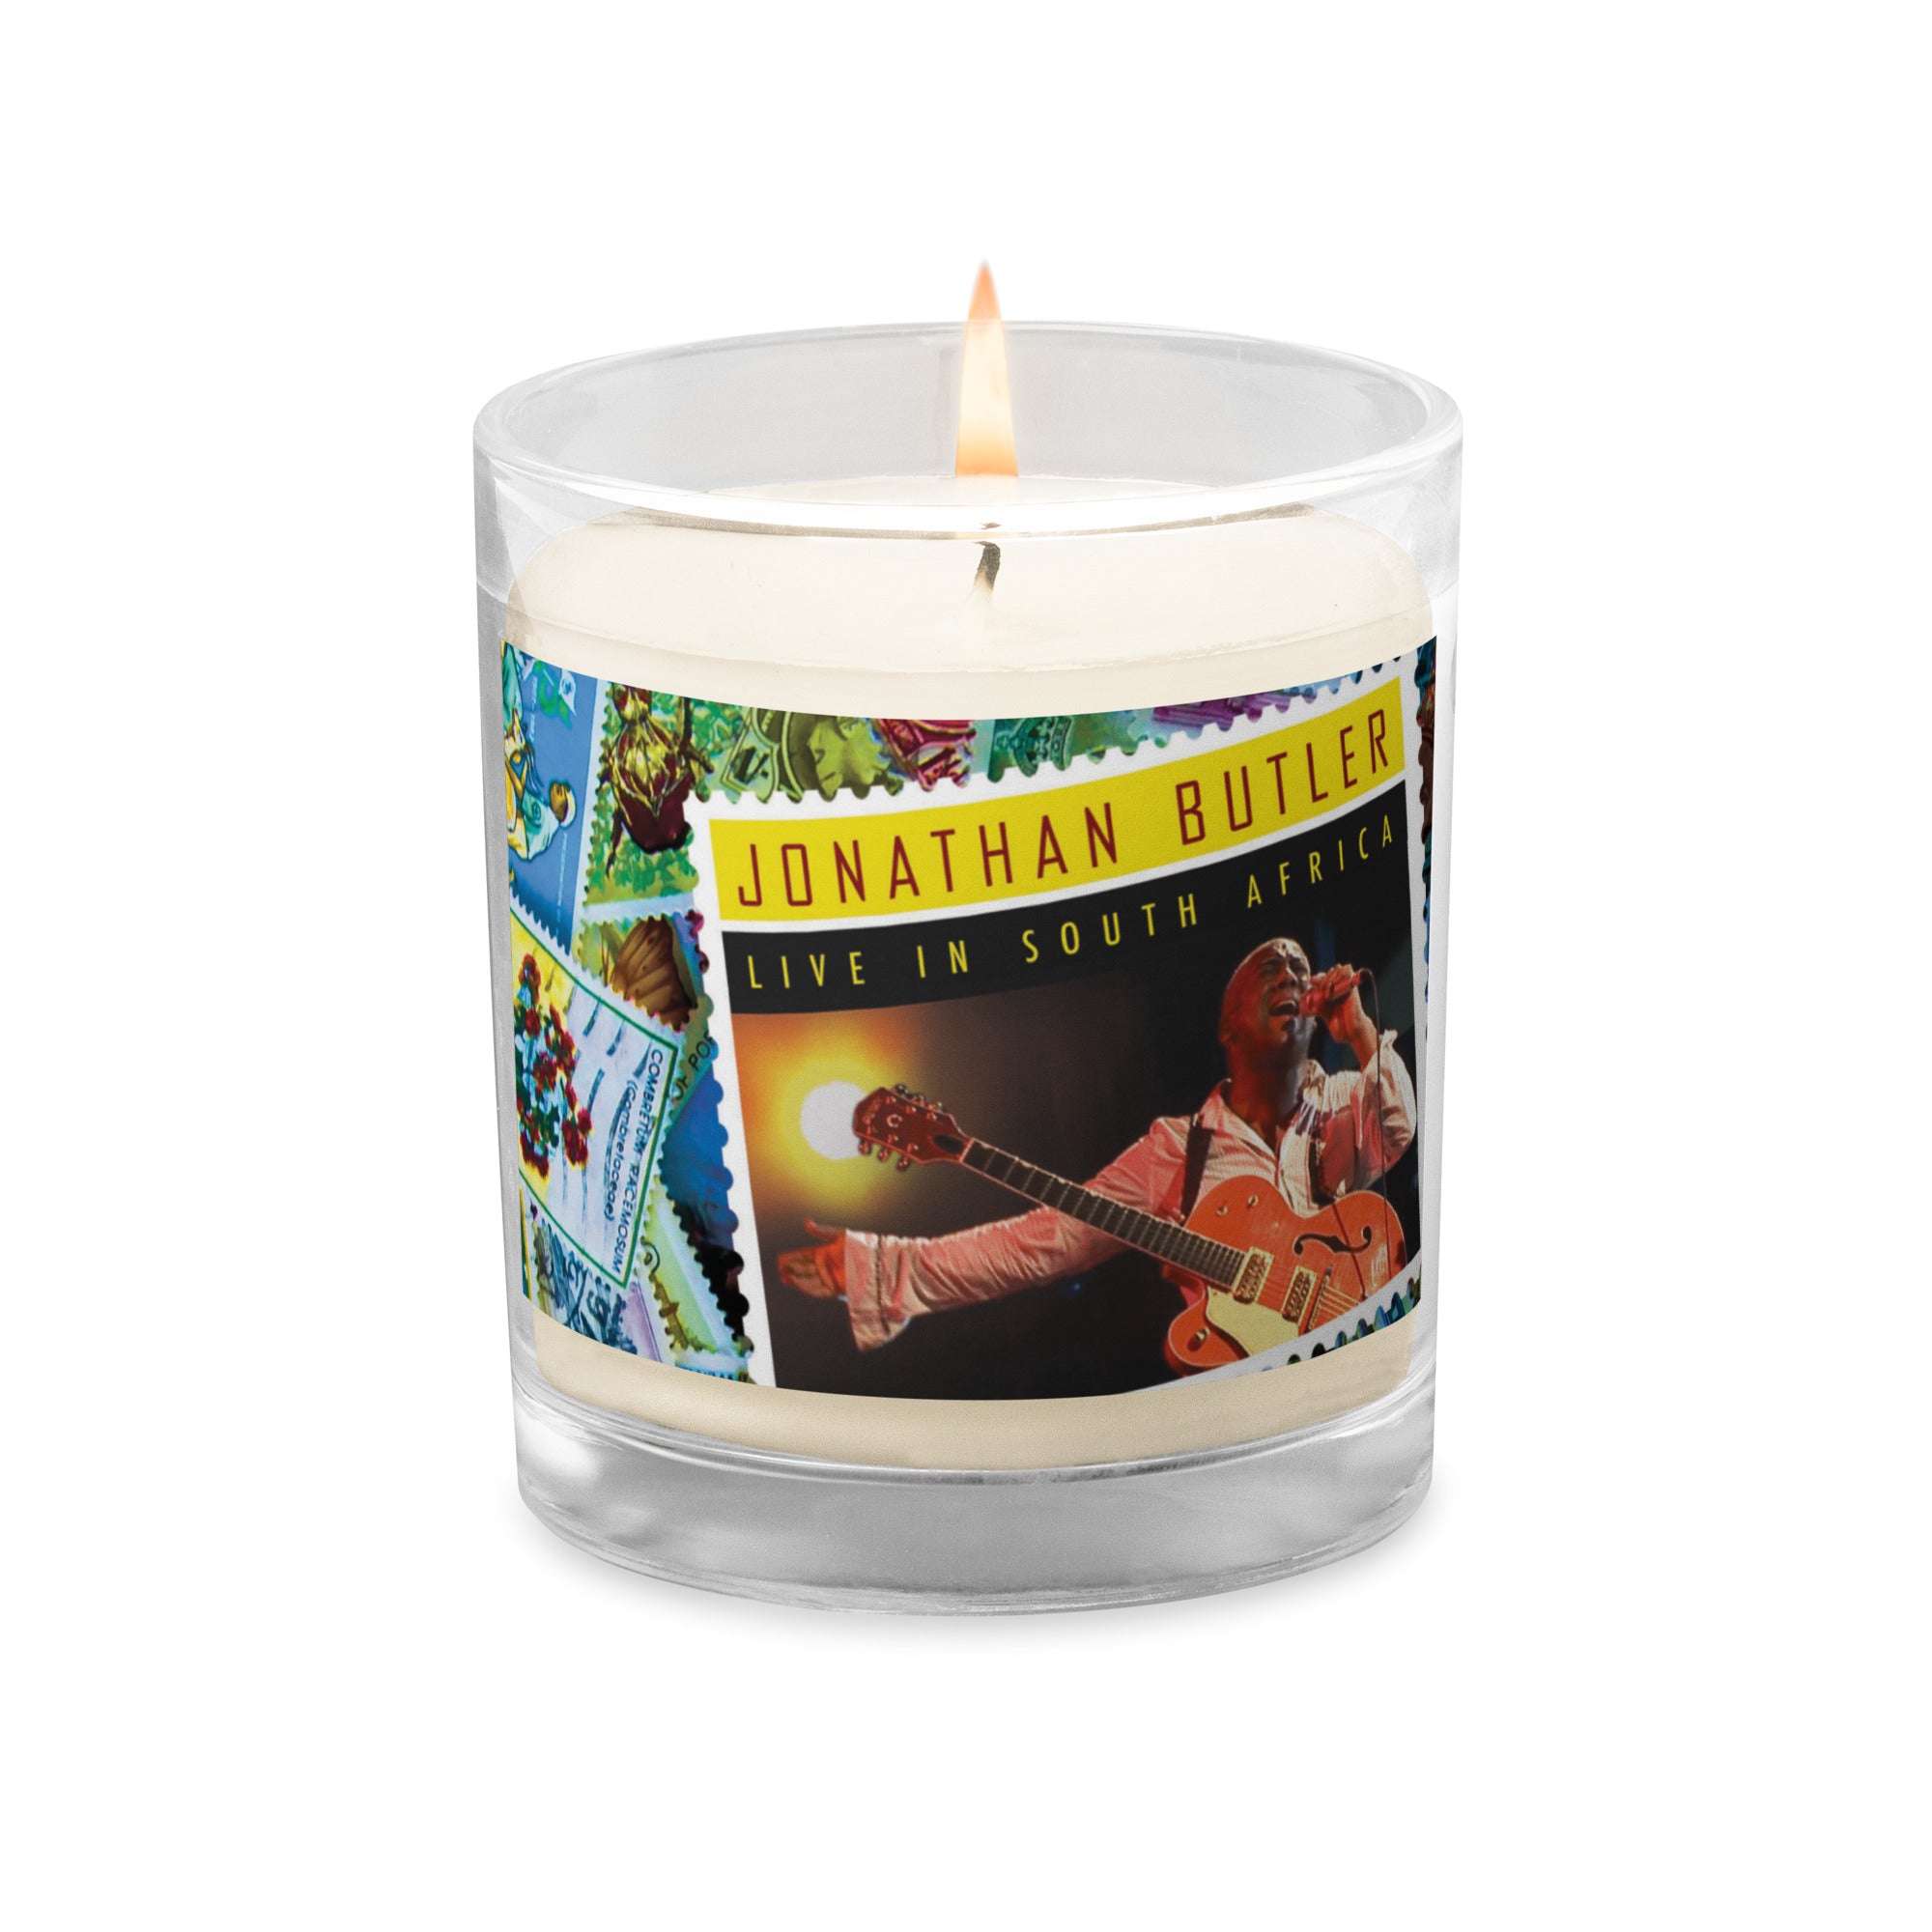 Live In South Africa – Glass Jar Candle